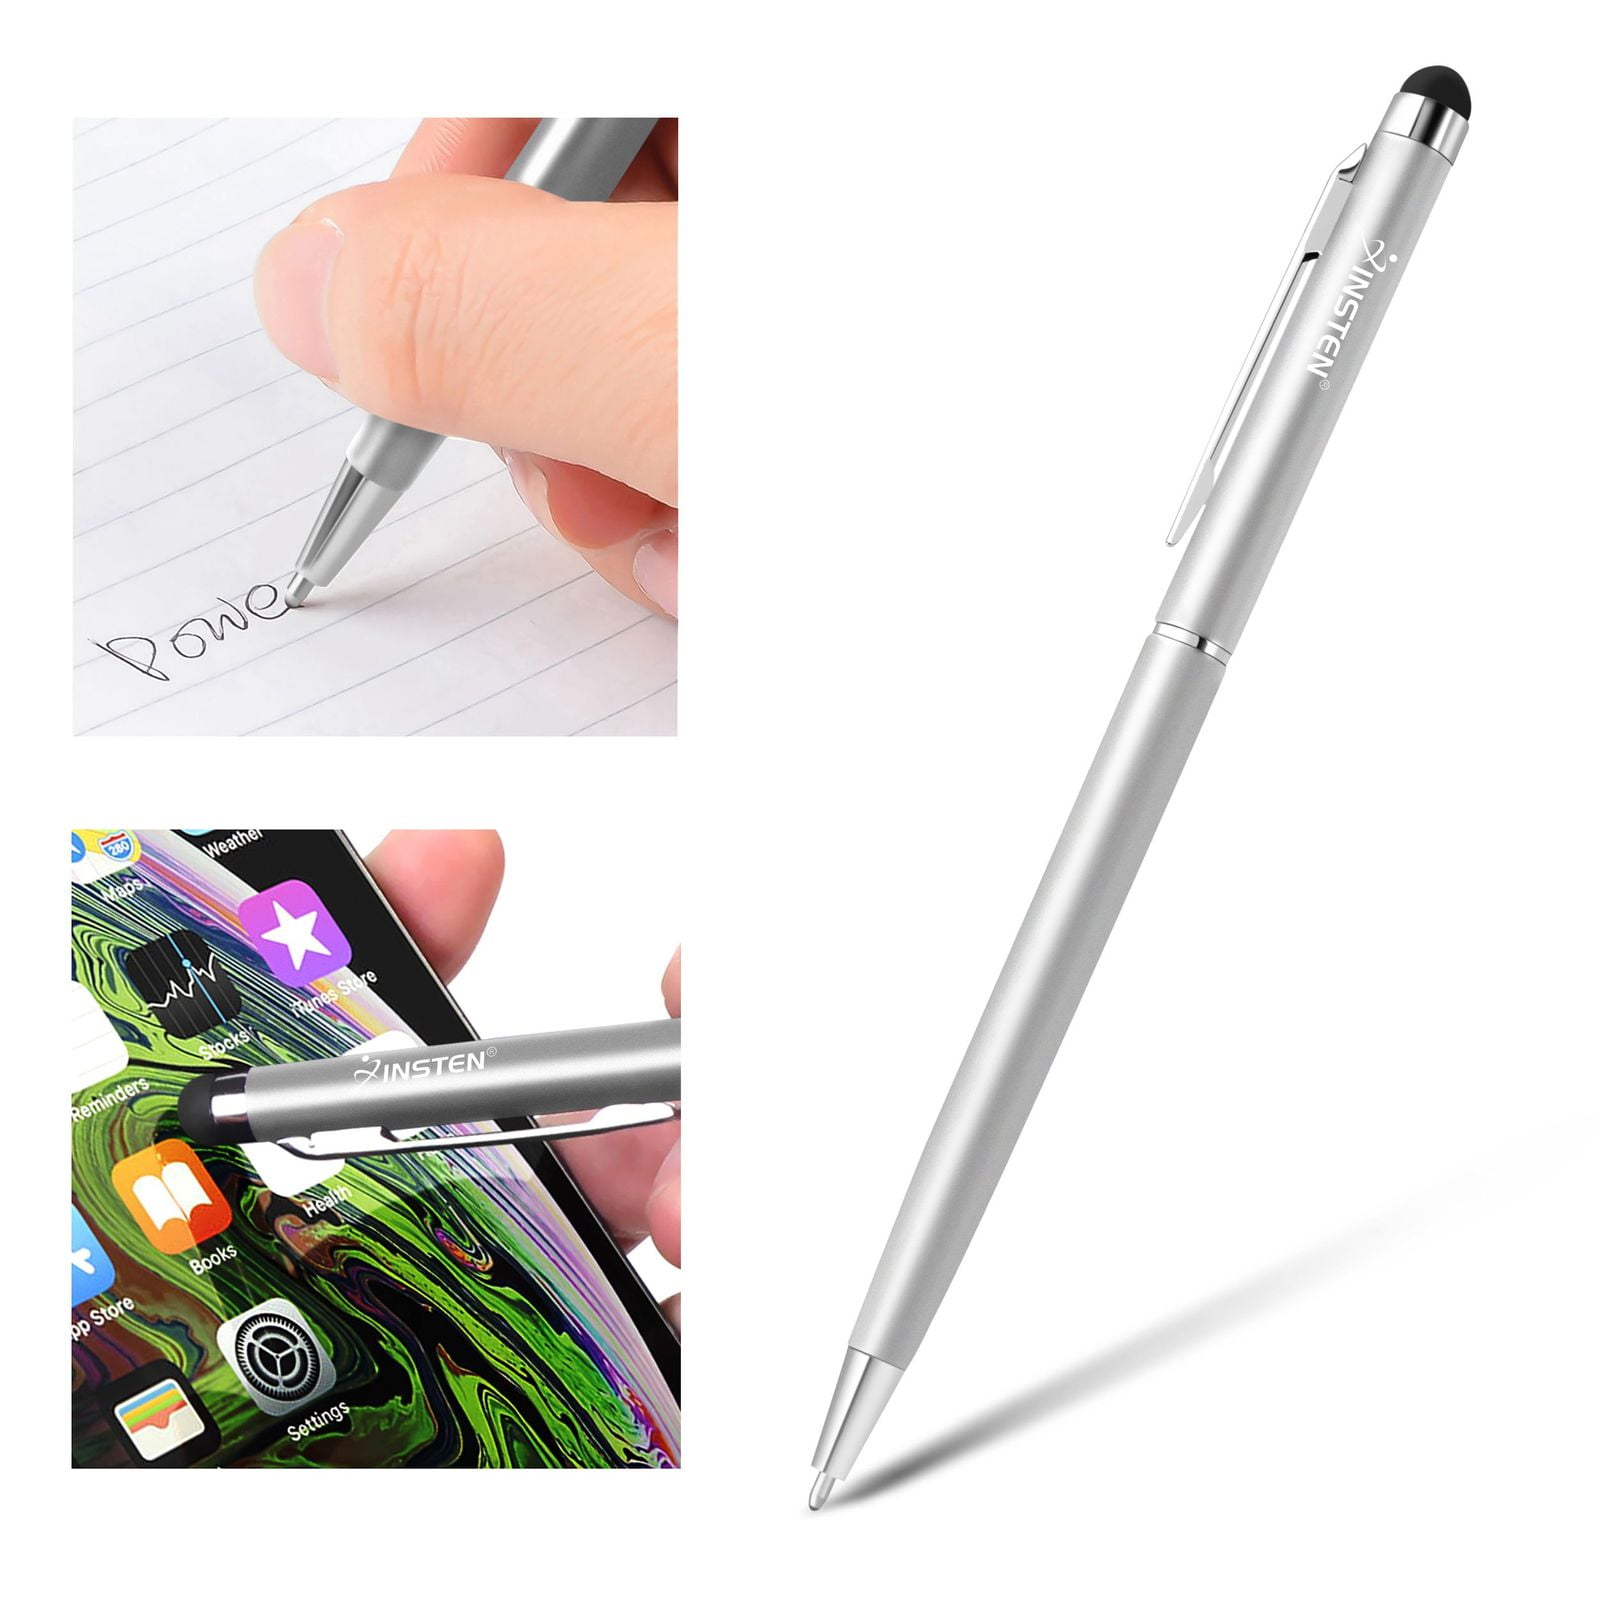 Vibe 2-in-1 Stylus & Ballpoint Pen for Capacitive Touchscreen Devices 